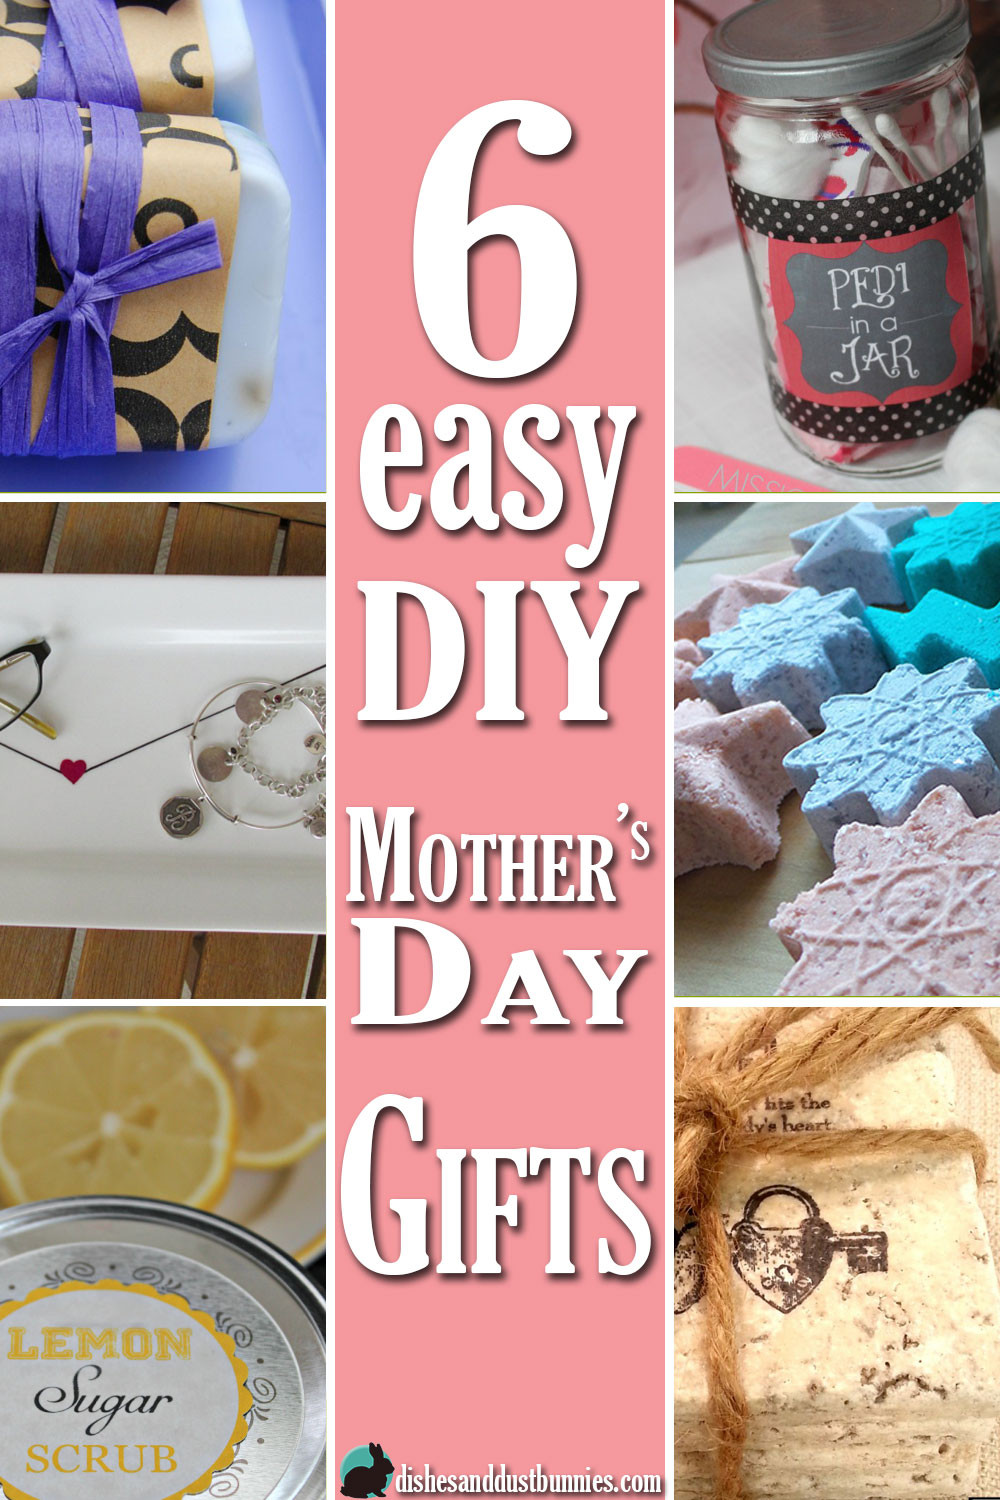 Mother'S Day Gift Ideas For Churches
 6 Easy DIY Mother s Day Gifts Dishes and Dust Bunnies